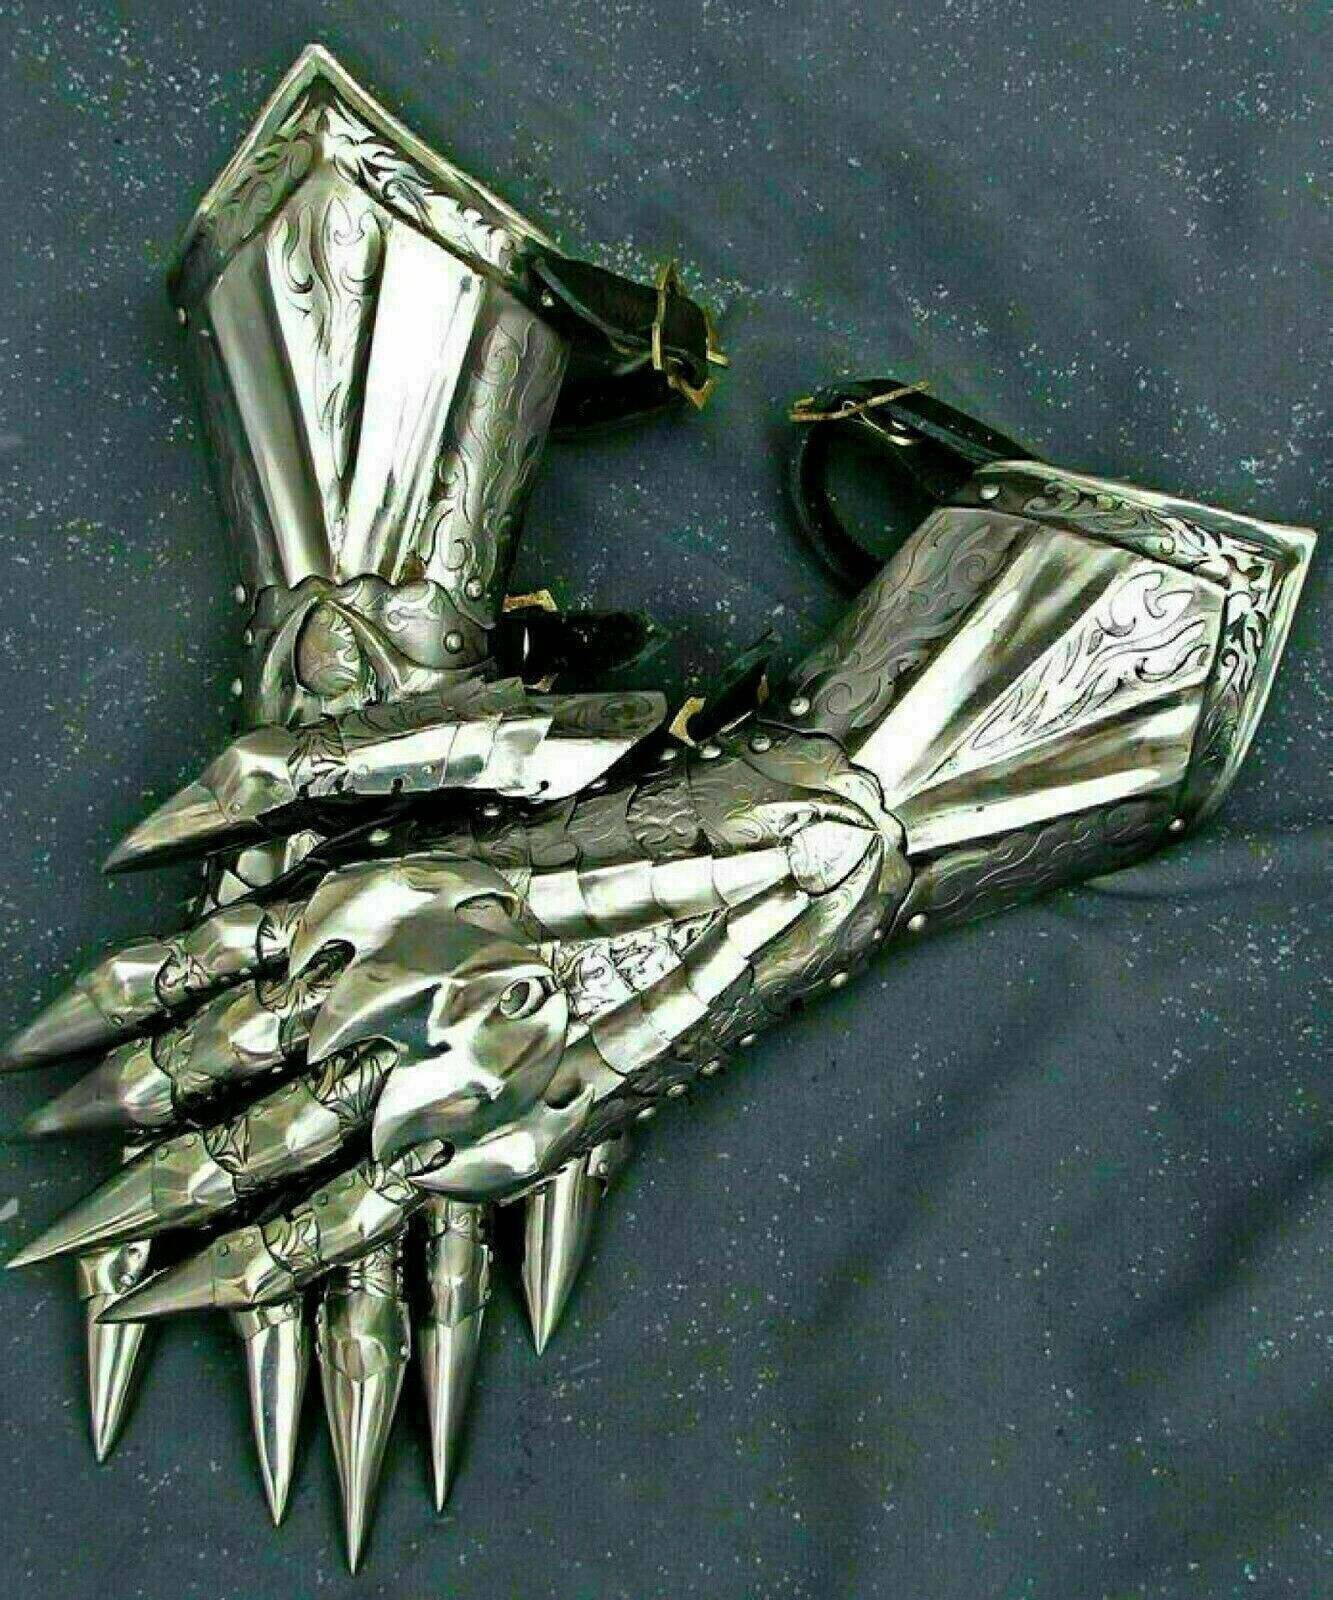 Articulated Nazgul Gauntlets from The Lord of the Rings- Medieval Armor Gloves